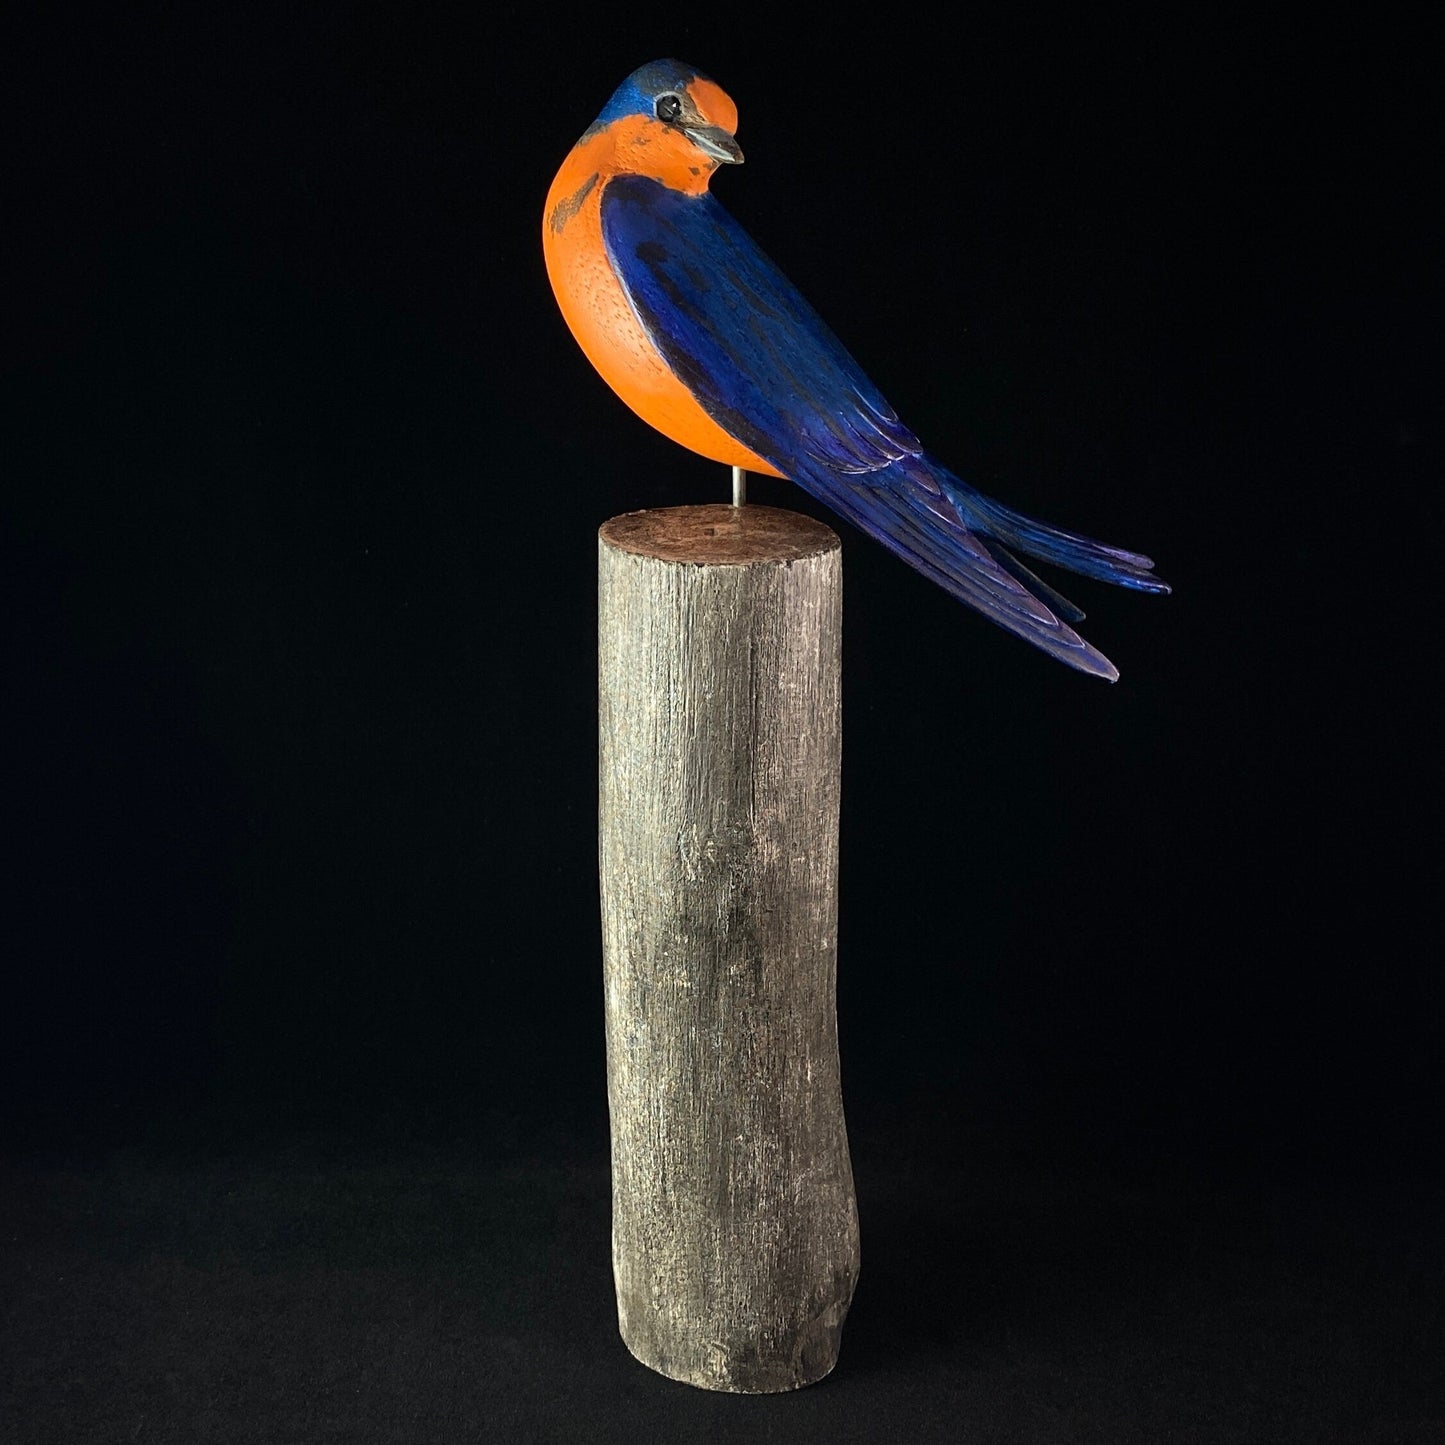 11 Inch Handmade, Hand-painted Wooden Barn Swallow